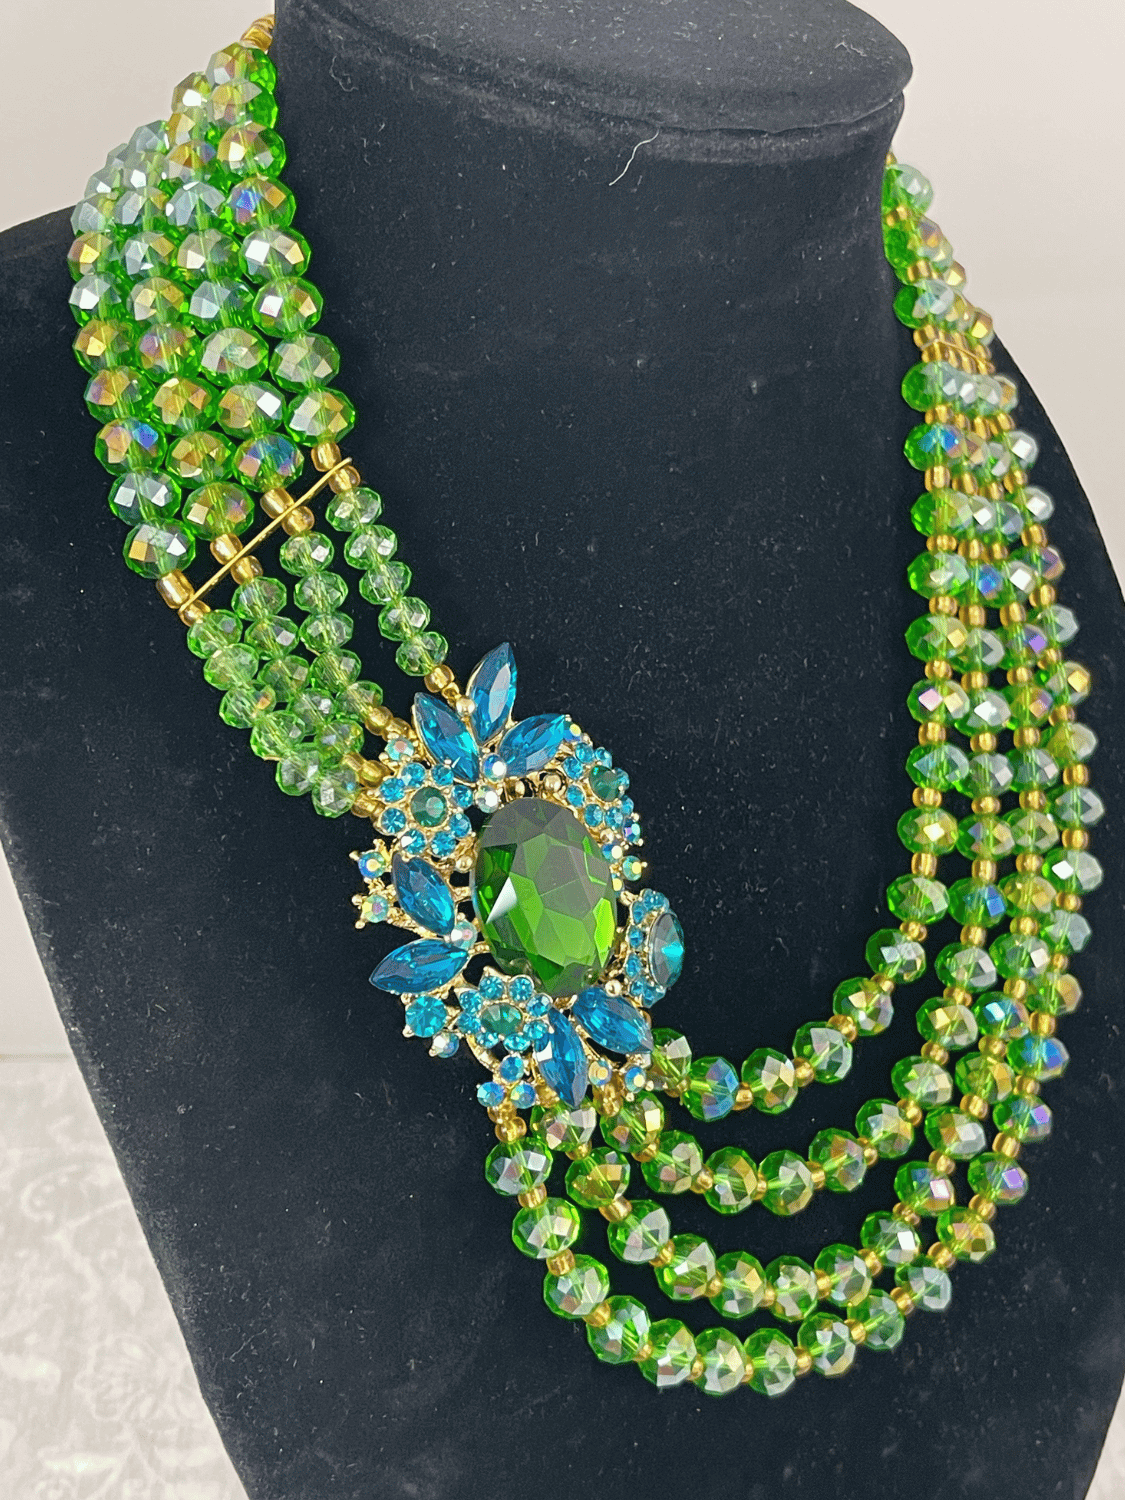 statement necklace, fashion necklace, bold necklace, chunky jewelry, Embroidered Clutch, clutch bag gift, evening bag, party clutch, bridesmaid gift, christmas jewelry, green necklace, beaded necklace, brooch necklace